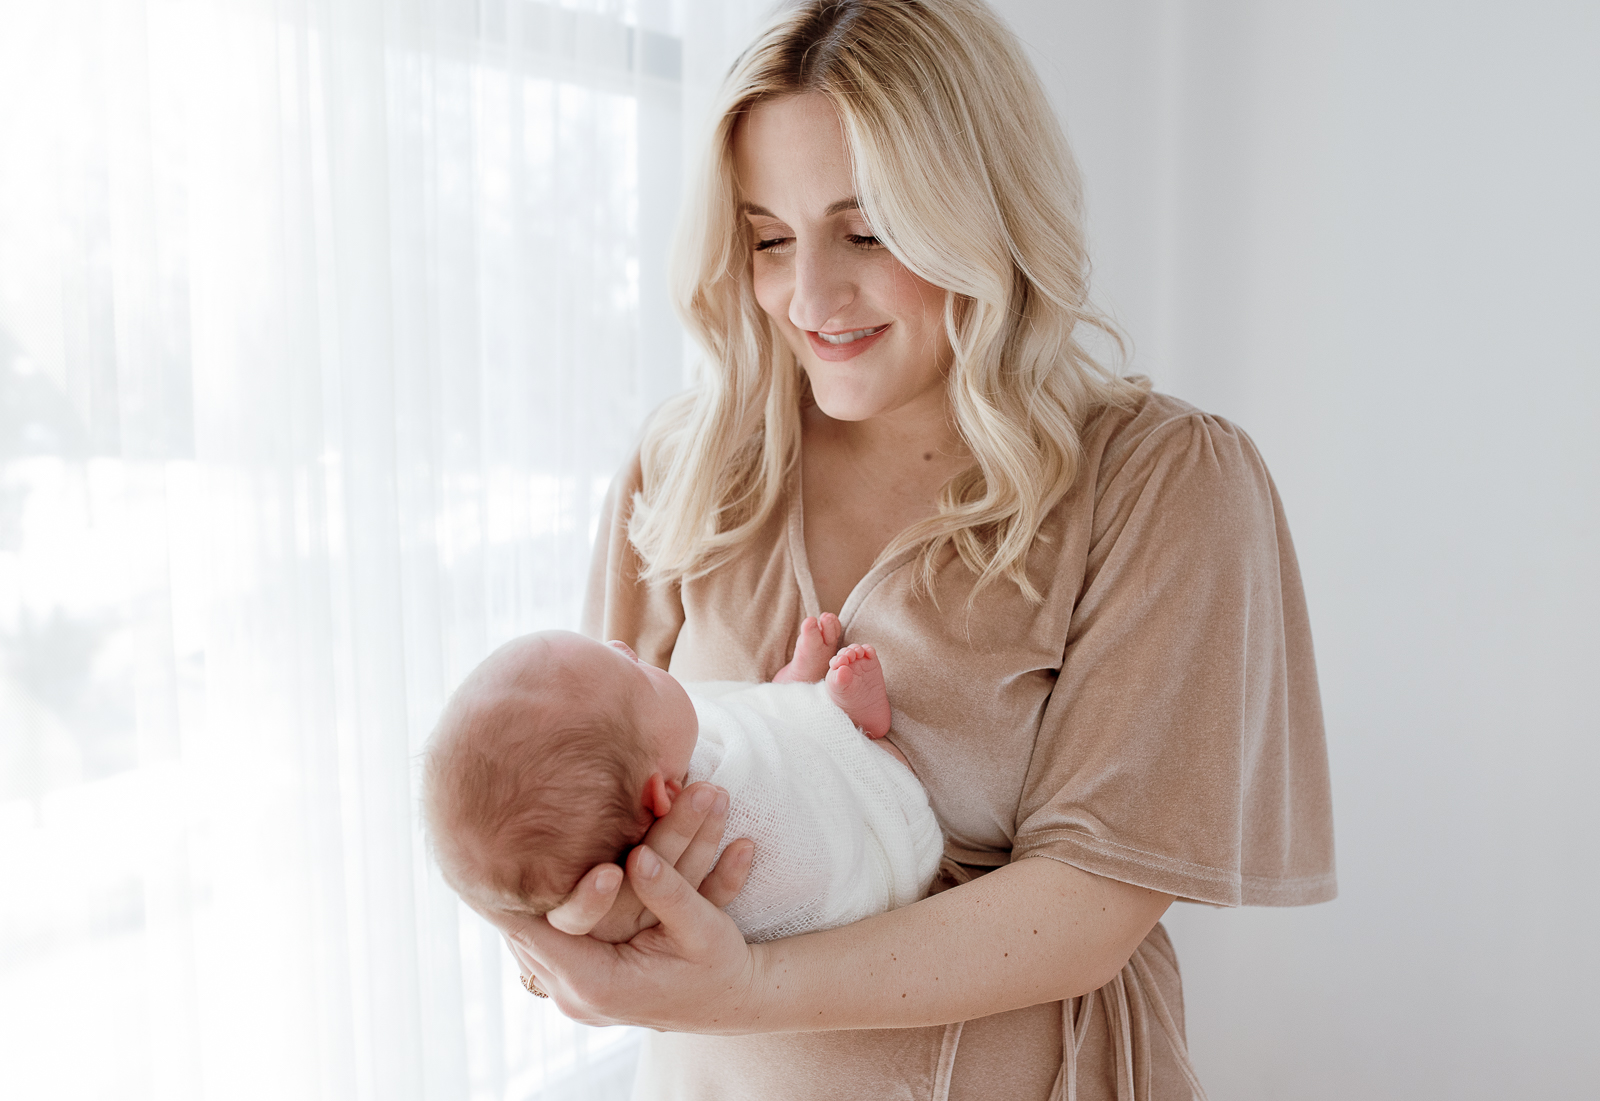 Wearing a velvet flutter sleeve dress, Detroit, Michigan's Laurel Smith Photography captures this new mom cradling her newborn baby. white translucent curtain, white studio plymouth michigan newborn photos, professional plymouth michigan newborn photographer, laurel smith photography, womens tan velvet flutter sleeve dress, newborn in white muslin swaddle #DetroitMichiganFamilyPhotographer #DetroitMichiganPhotographer #FamilyPhotoOutfitInspiration #PlymouthMichiganFamilyPhotographer #PlymouthMichiganPhotographer #ExtendedFamilyPhotos #DetroitMichiganFallFamilyPhotos #LetThemBeLittle #LetTheKids #DetroitMichiganLifestylePhotographer